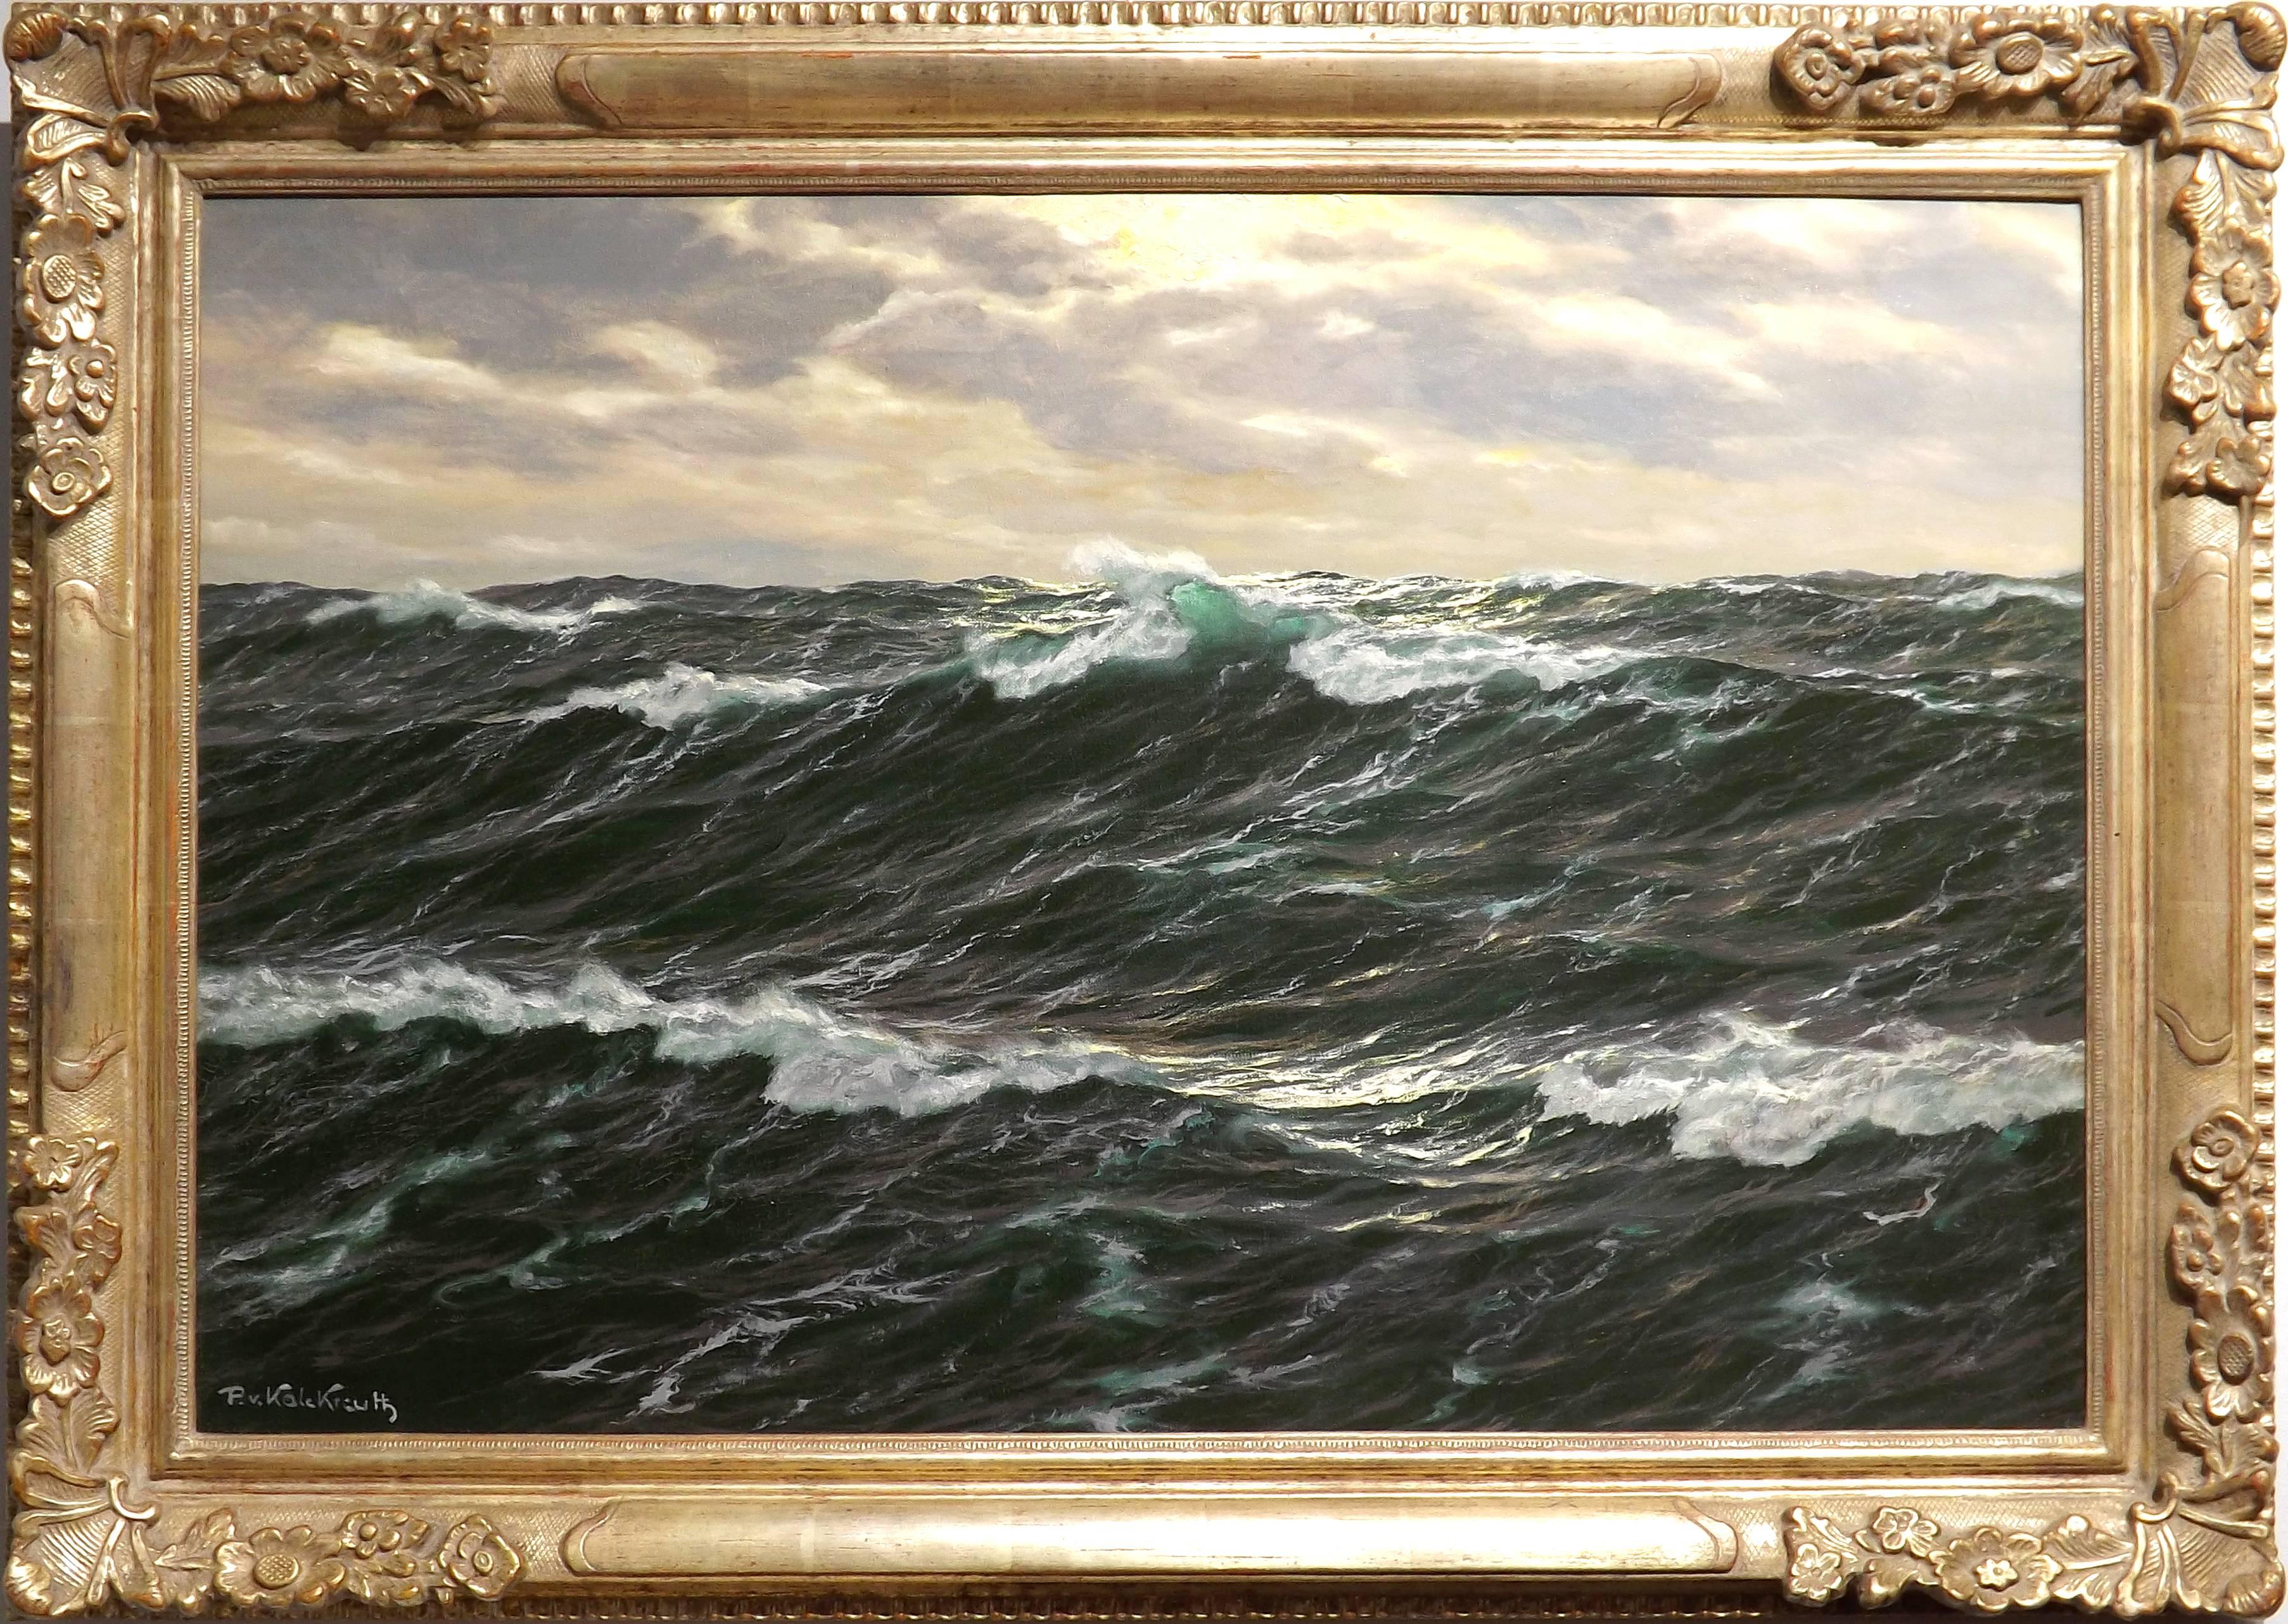 A cresting wave catches the sunlight in this breathtaking seascape by well-known German marine painter Patrick von Kalckreuth. 

Patrick von Kalckreuth (1892–1970) was a leading German maritime painter. He was born Patrick Dunbar and was the son